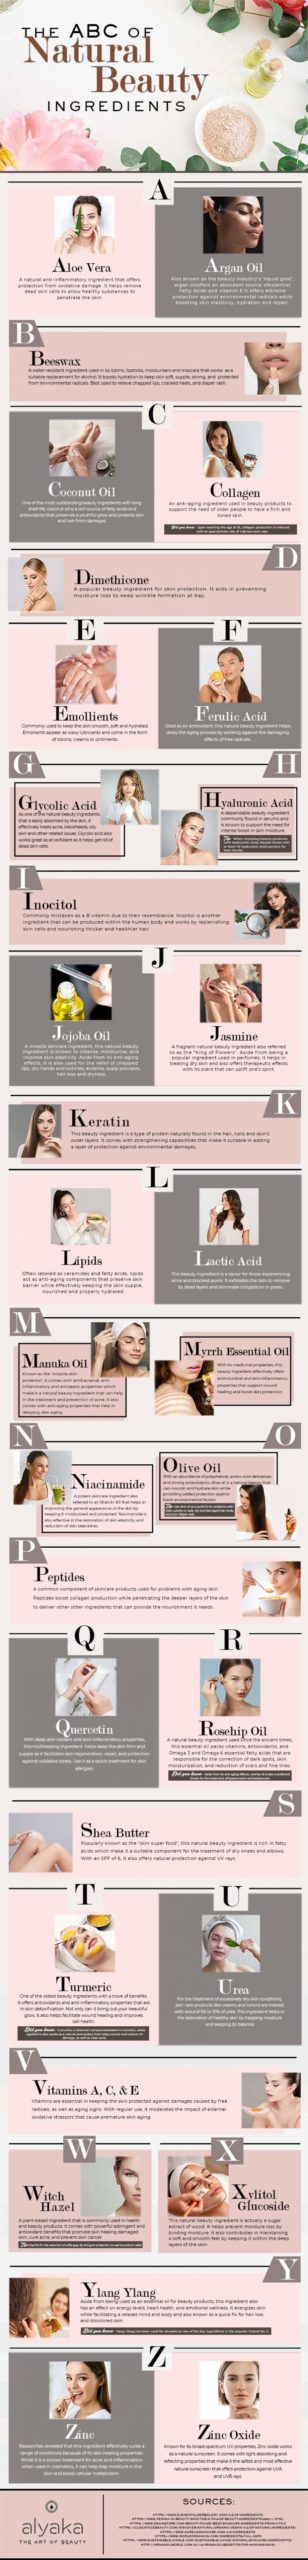 ABC-of-Natural-Beauty-Ingredients